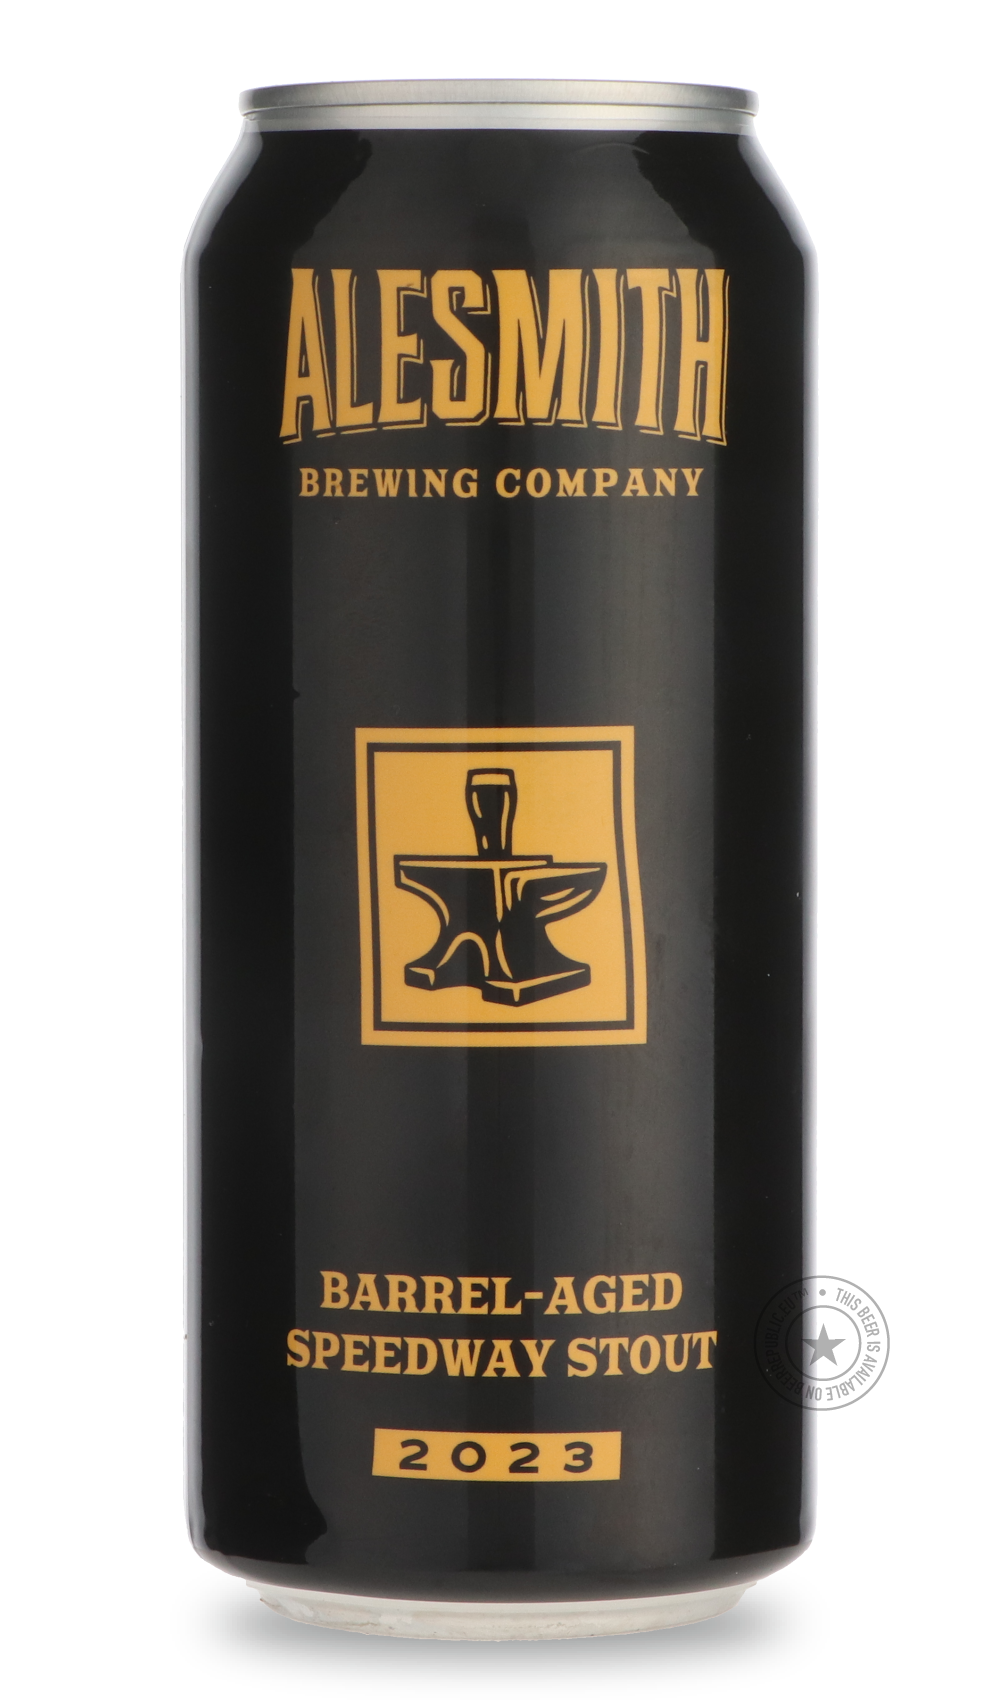 -AleSmith- Barrel-Aged Speedway Stout-Stout & Porter- Only @ Beer Republic - The best online beer store for American & Canadian craft beer - Buy beer online from the USA and Canada - Bier online kopen - Amerikaans bier kopen - Craft beer store - Craft beer kopen - Amerikanisch bier kaufen - Bier online kaufen - Acheter biere online - IPA - Stout - Porter - New England IPA - Hazy IPA - Imperial Stout - Barrel Aged - Barrel Aged Imperial Stout - Brown - Dark beer - Blond - Blonde - Pilsner - Lager - Wheat - W